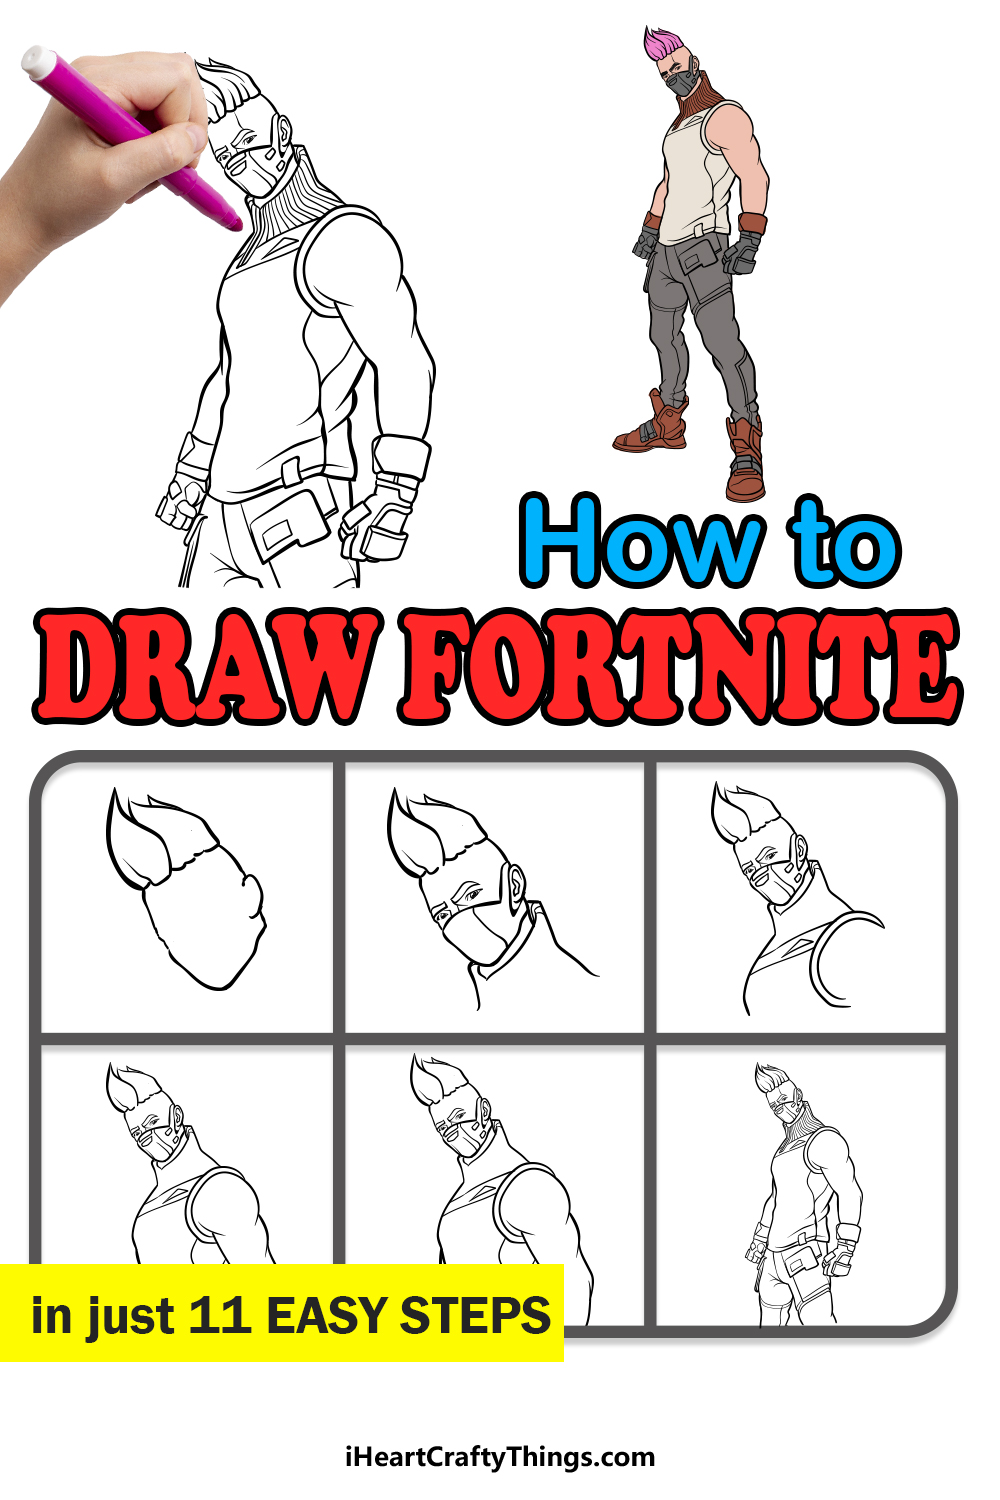 how to draw fortnite in 11 easy steps